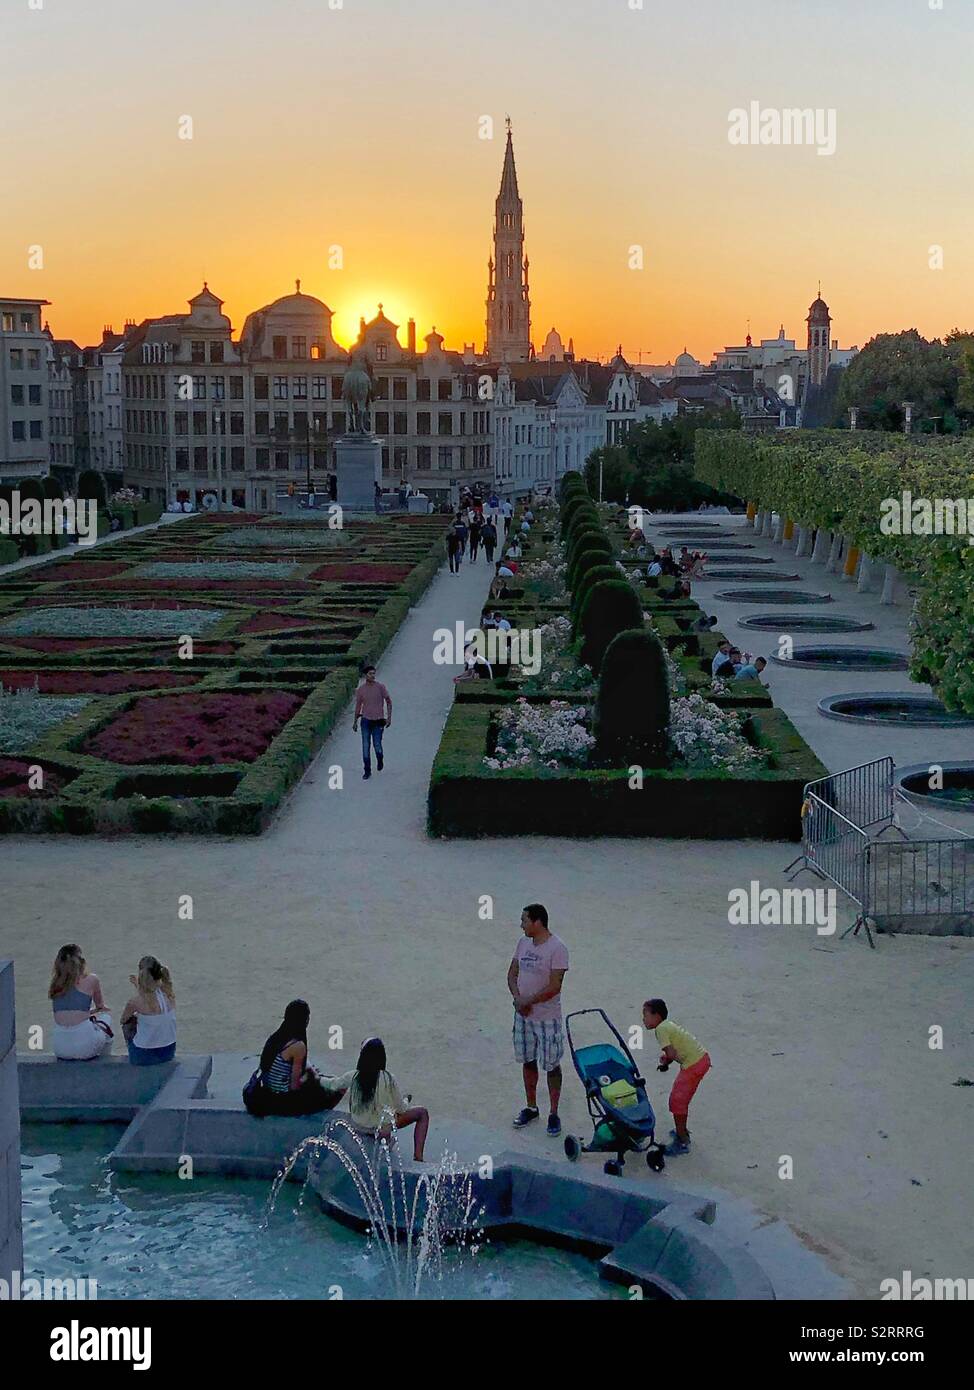 Mont des Arts park (Kunstberg) and Brussels Square in centre of Brussels, Belgium, at sunset in summer. Stock Photo